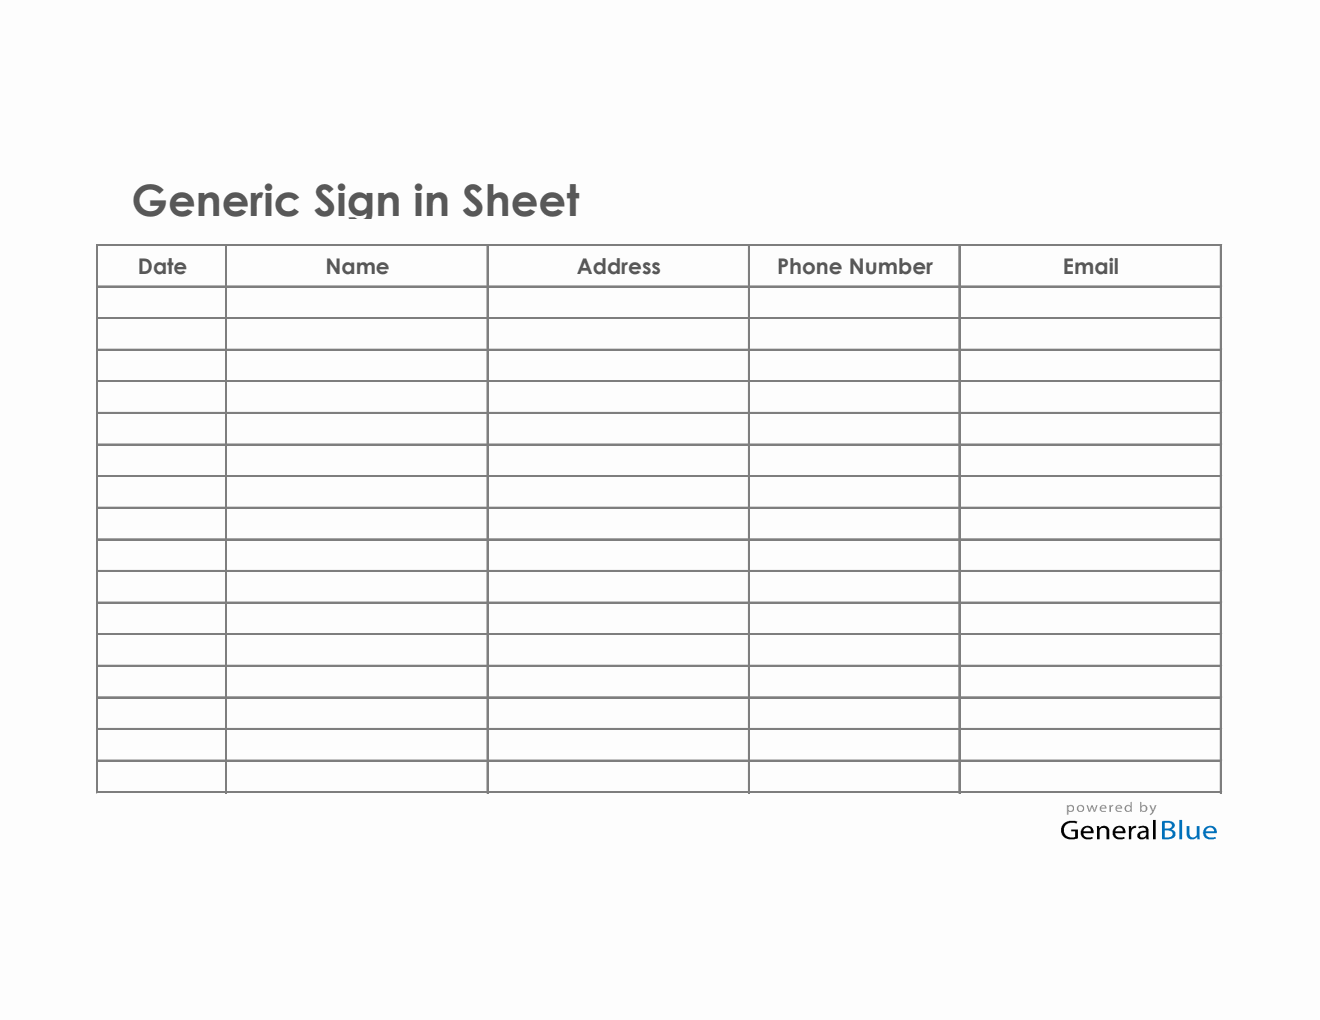 Generic Sign In Sheet in Excel